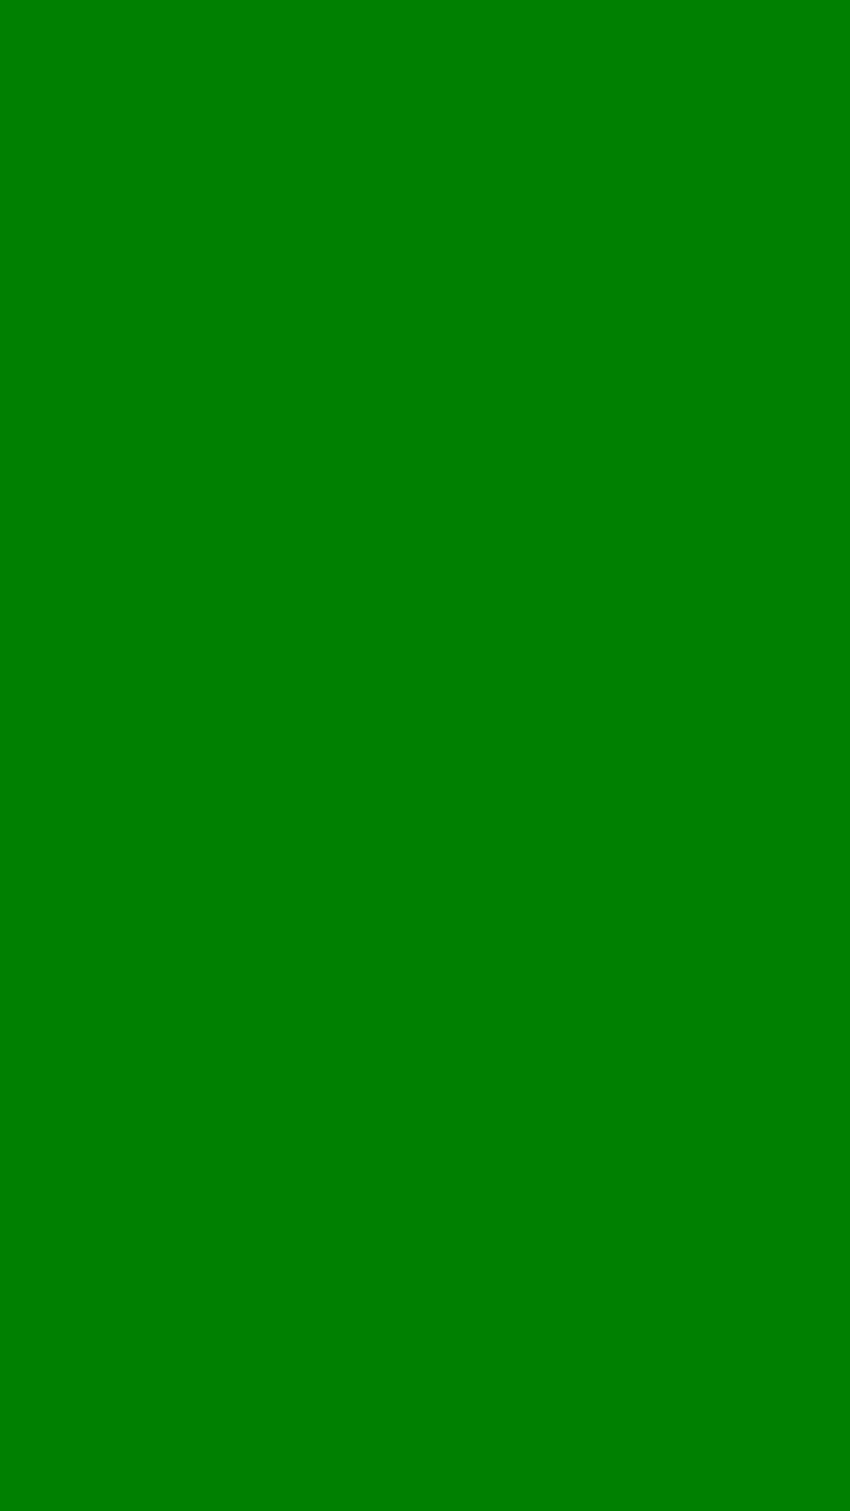 Green Web Color Solid Color Backgrounds for Mobile, green mobile HD phone wallpaper